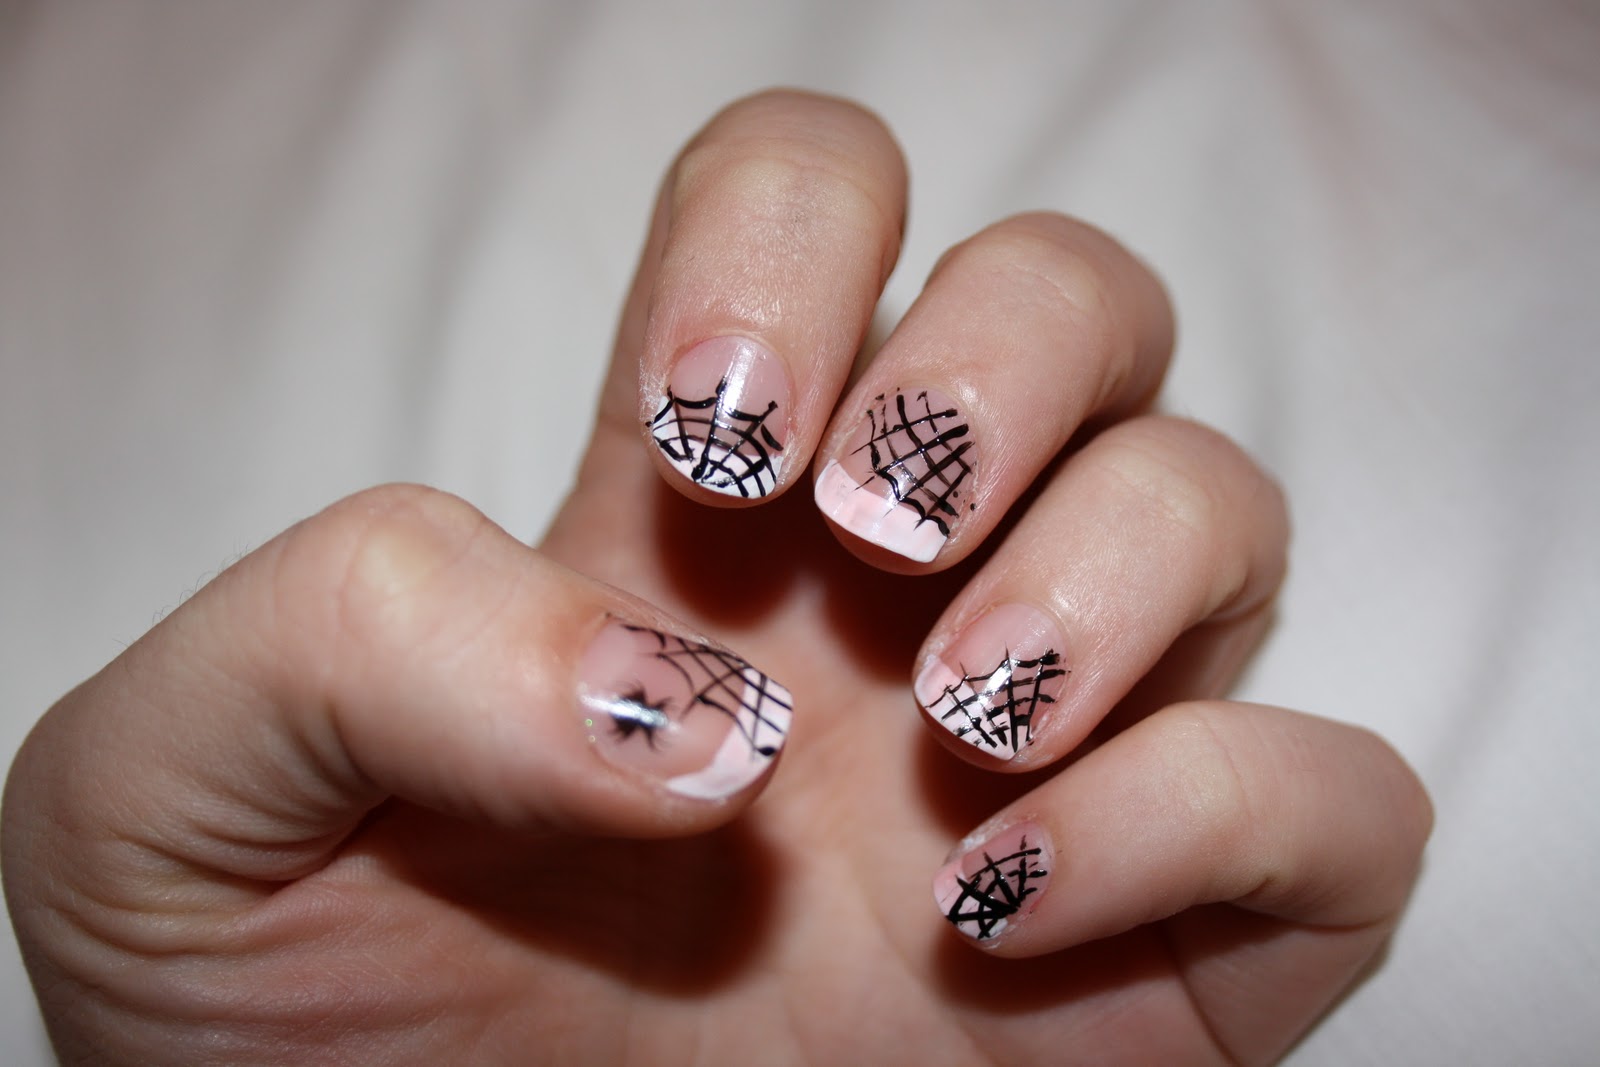  nail series, I have created a cobweb nail design which is really easy